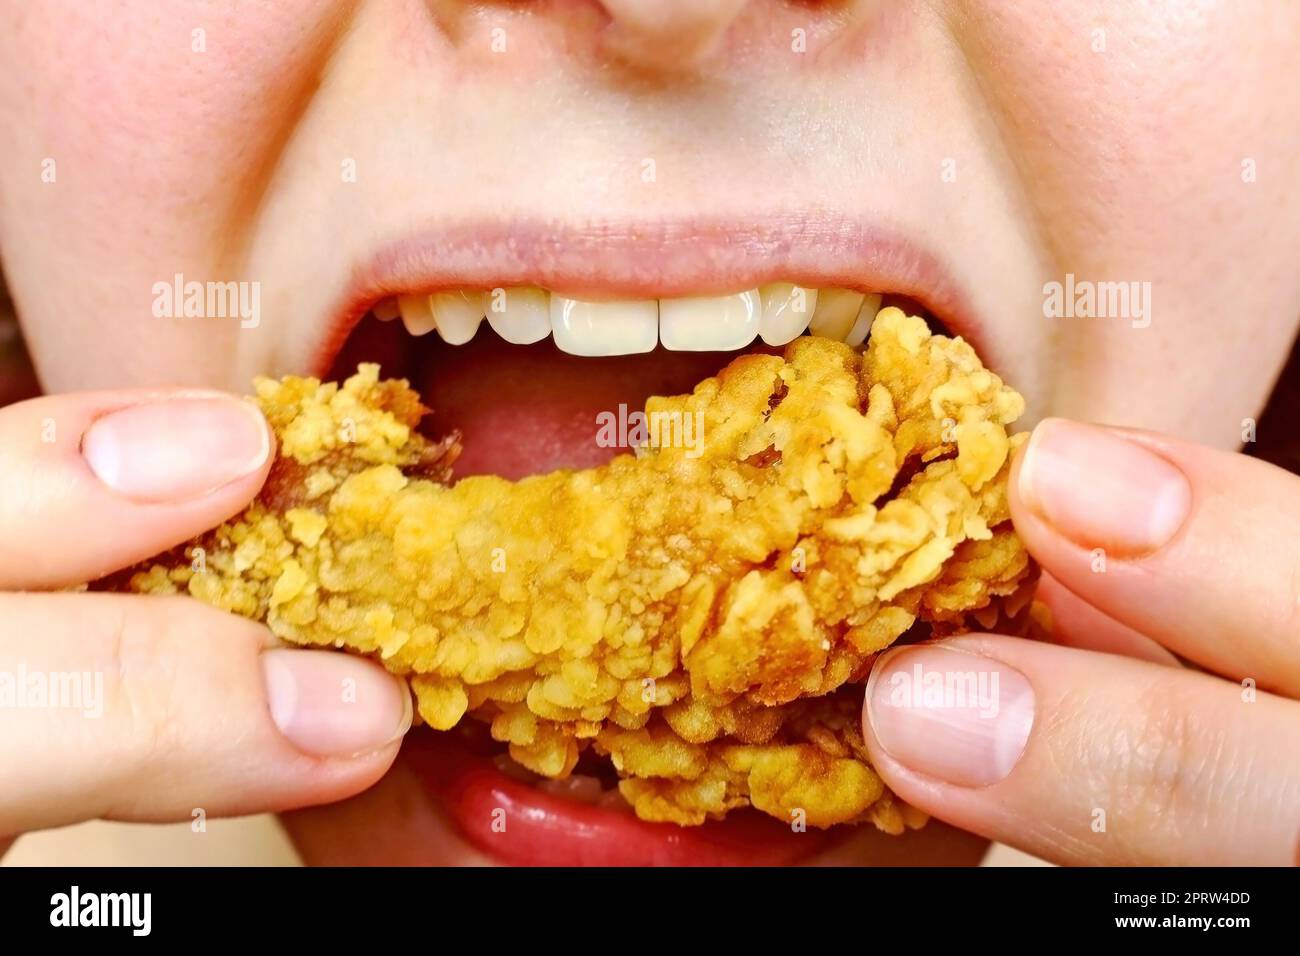 Woman eating a takeaway fried chicken wing from fast food cafe with a mouth and teeth close up. Stock Photo